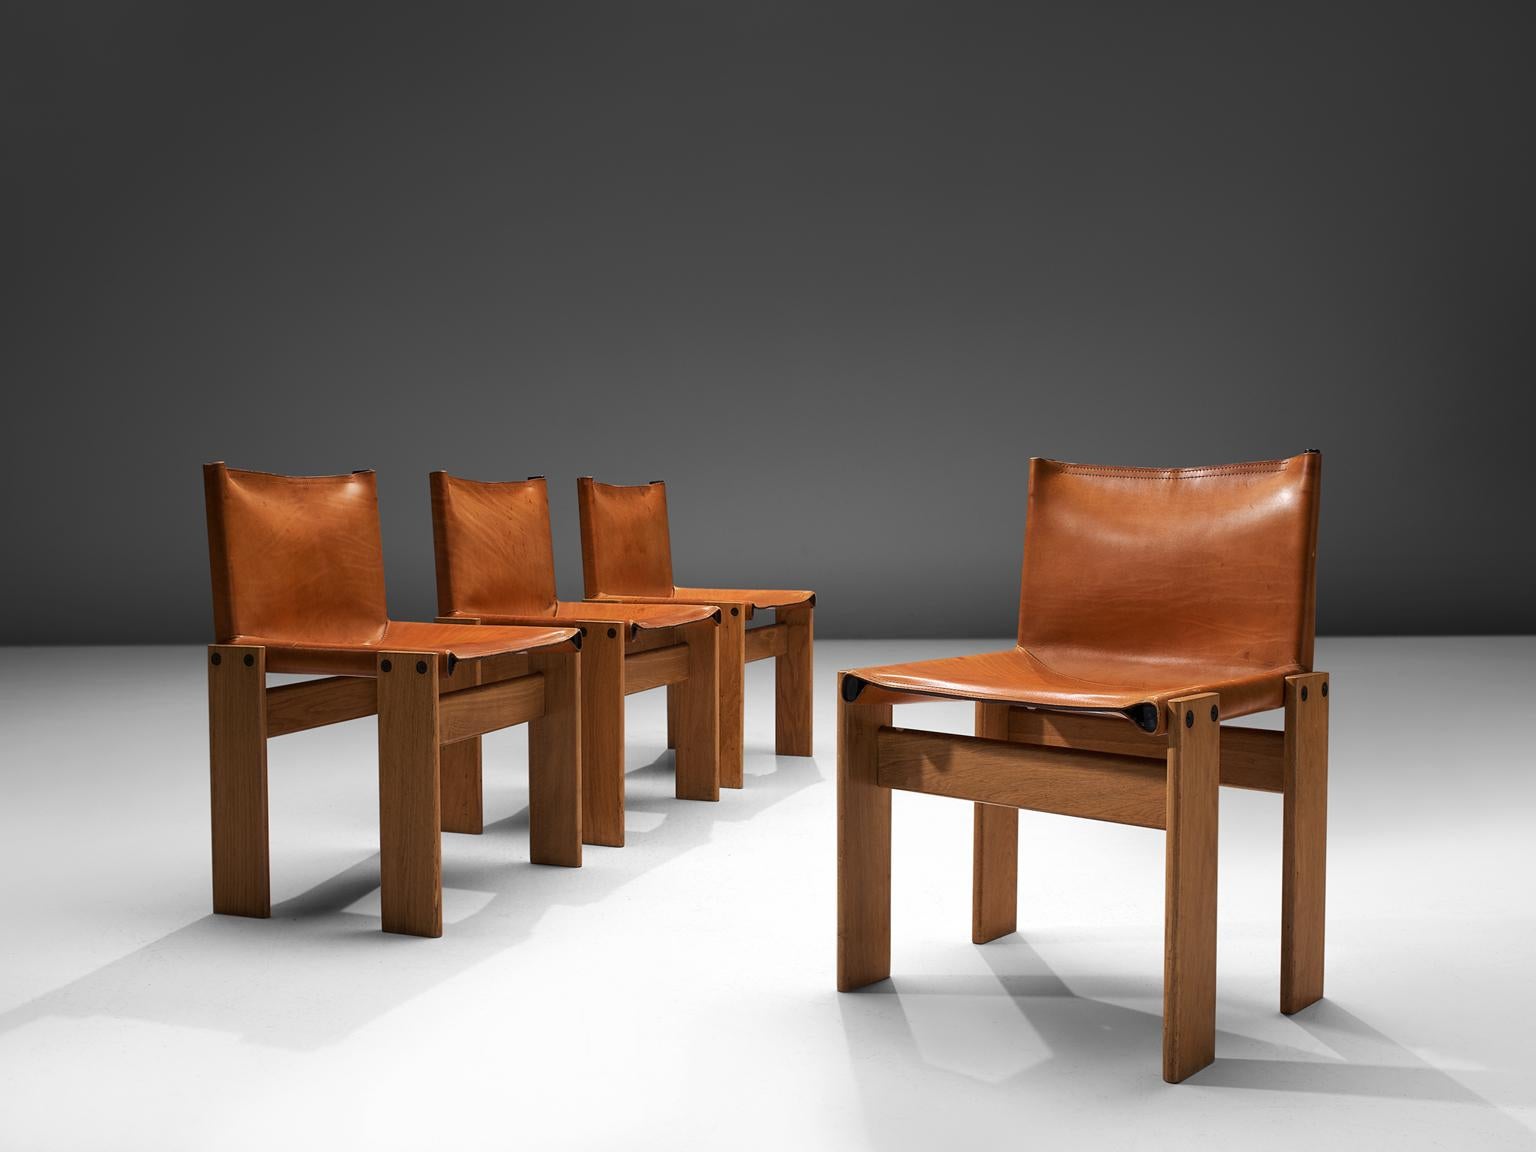 Afra & Tobia Scarpa for Molteni, Monk set of Four dining chairs, patinated beech and cognac leather, Italy, 1974.

The wonderfully cognac leather forms a striking combination with the blond wood. Interesting is the 'flat' shape of this chair where